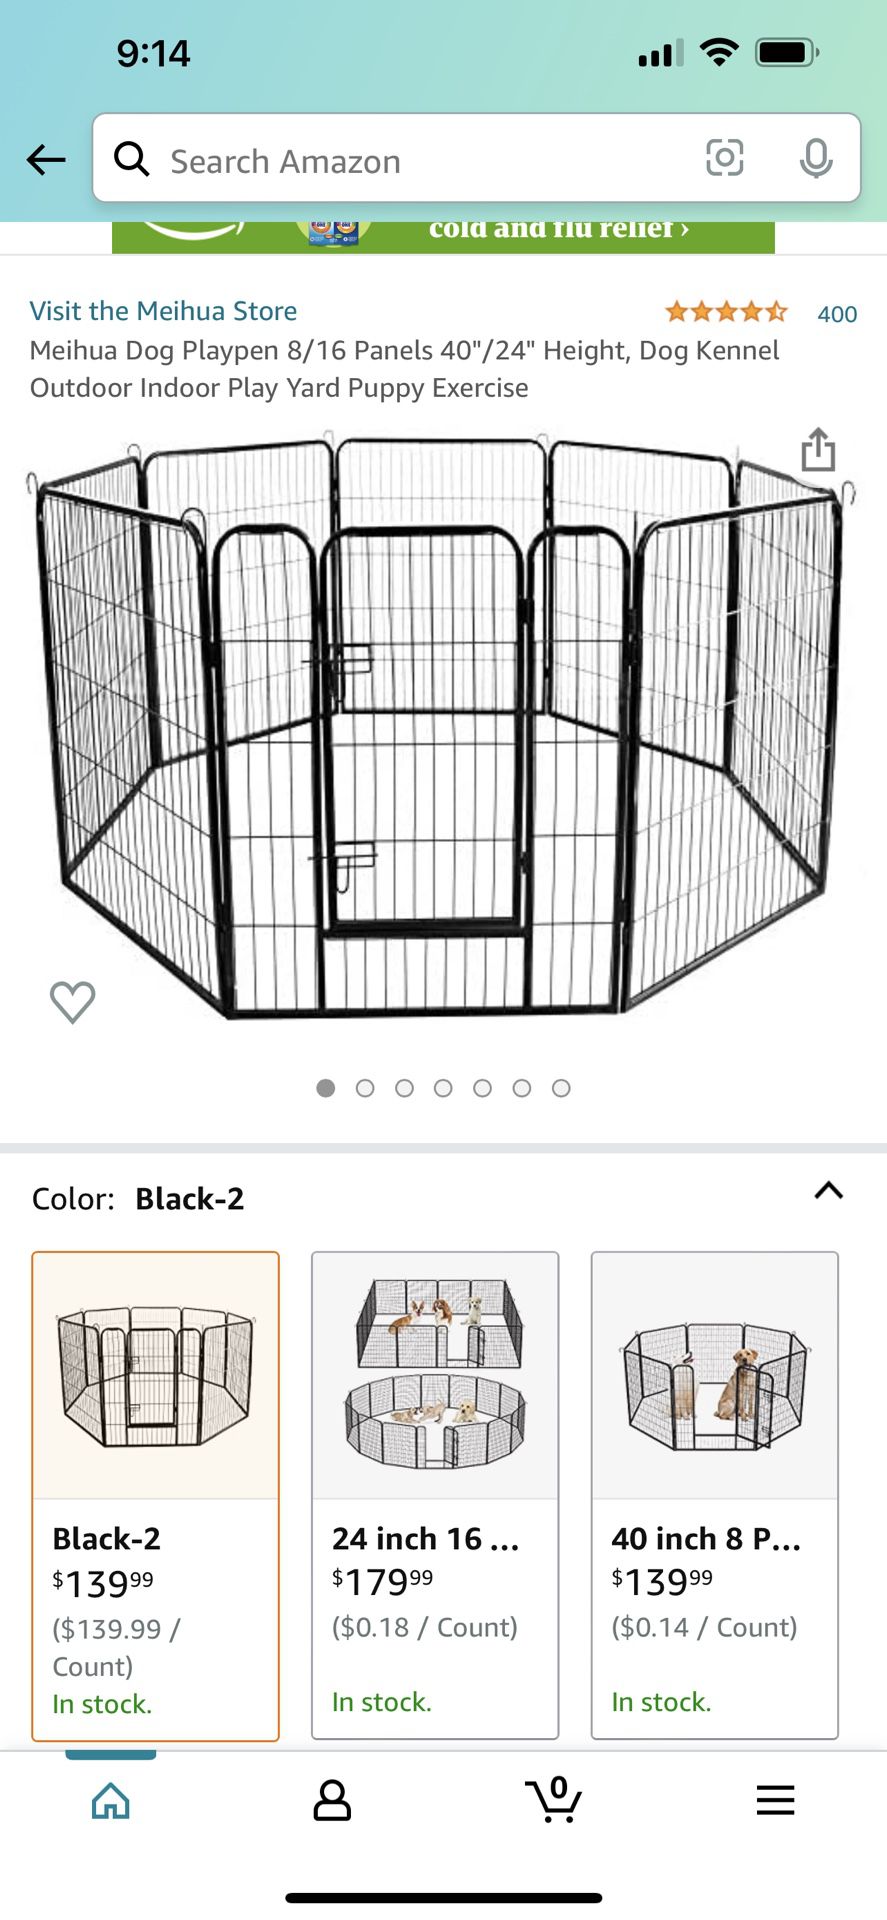 Meihua Dog Playpen 8/16 Panels 40"/24" Height, Dog Kennel Outdoor Indoor Play Yard Puppy Exercise